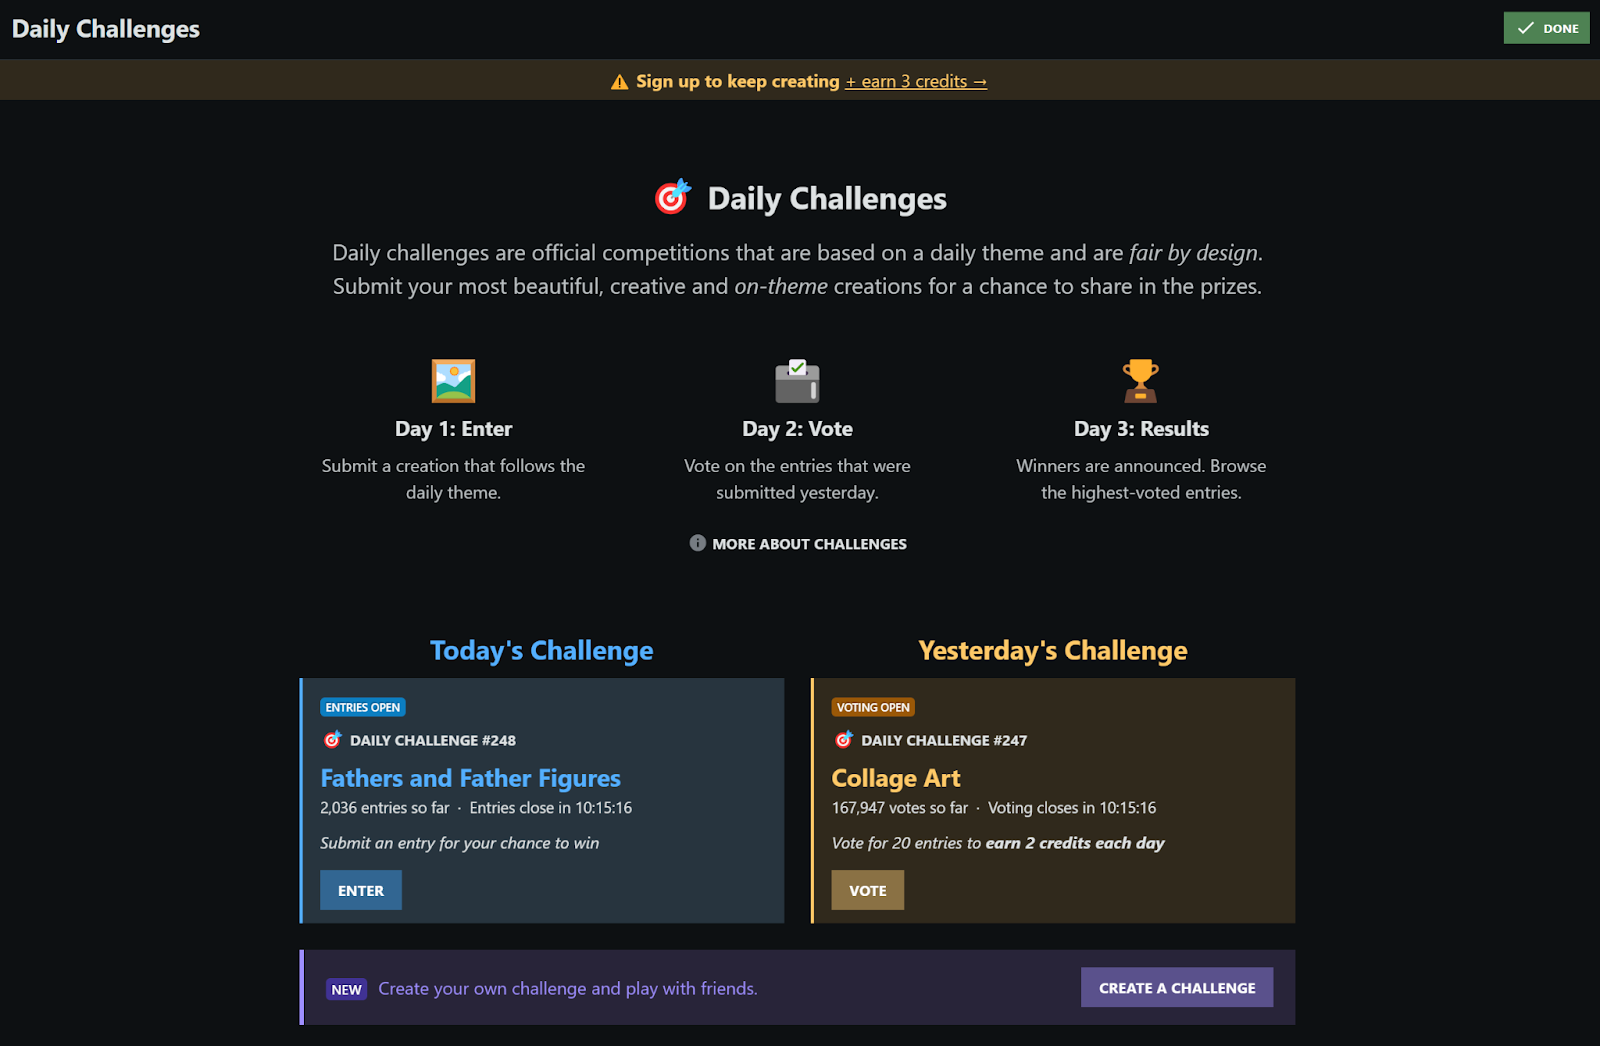 NightCafe daily challenges page.